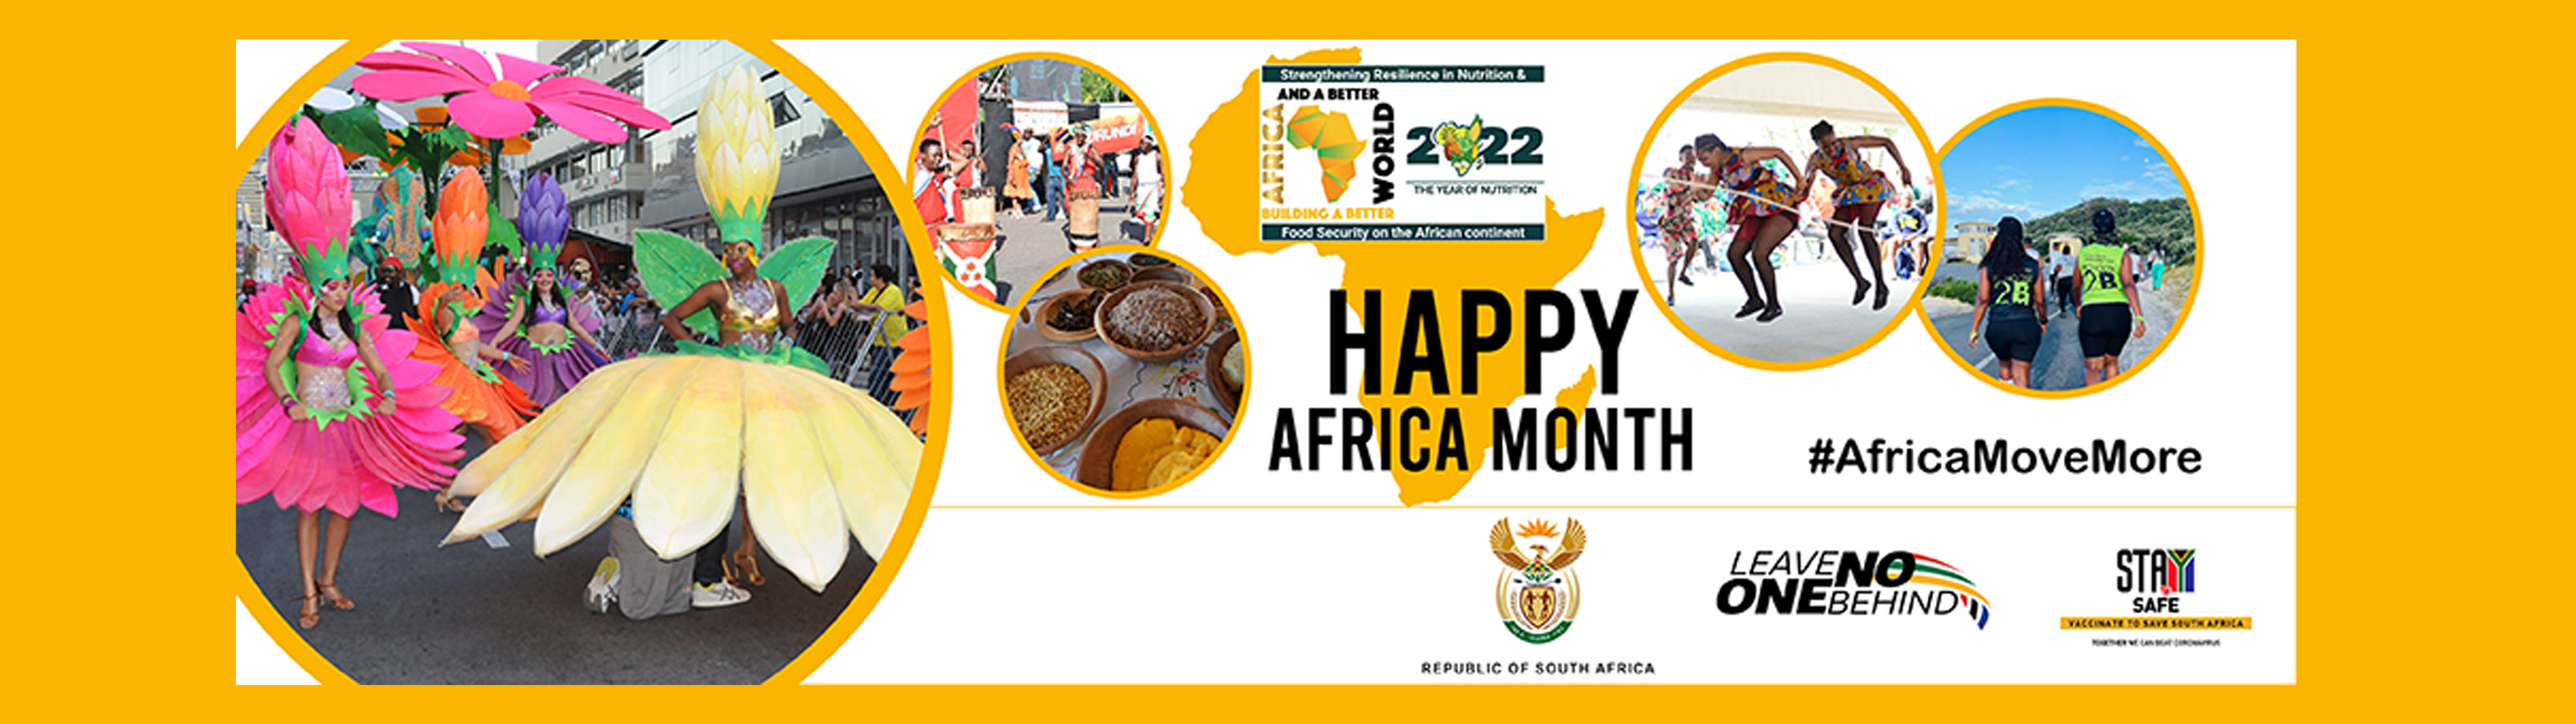 Africa Month